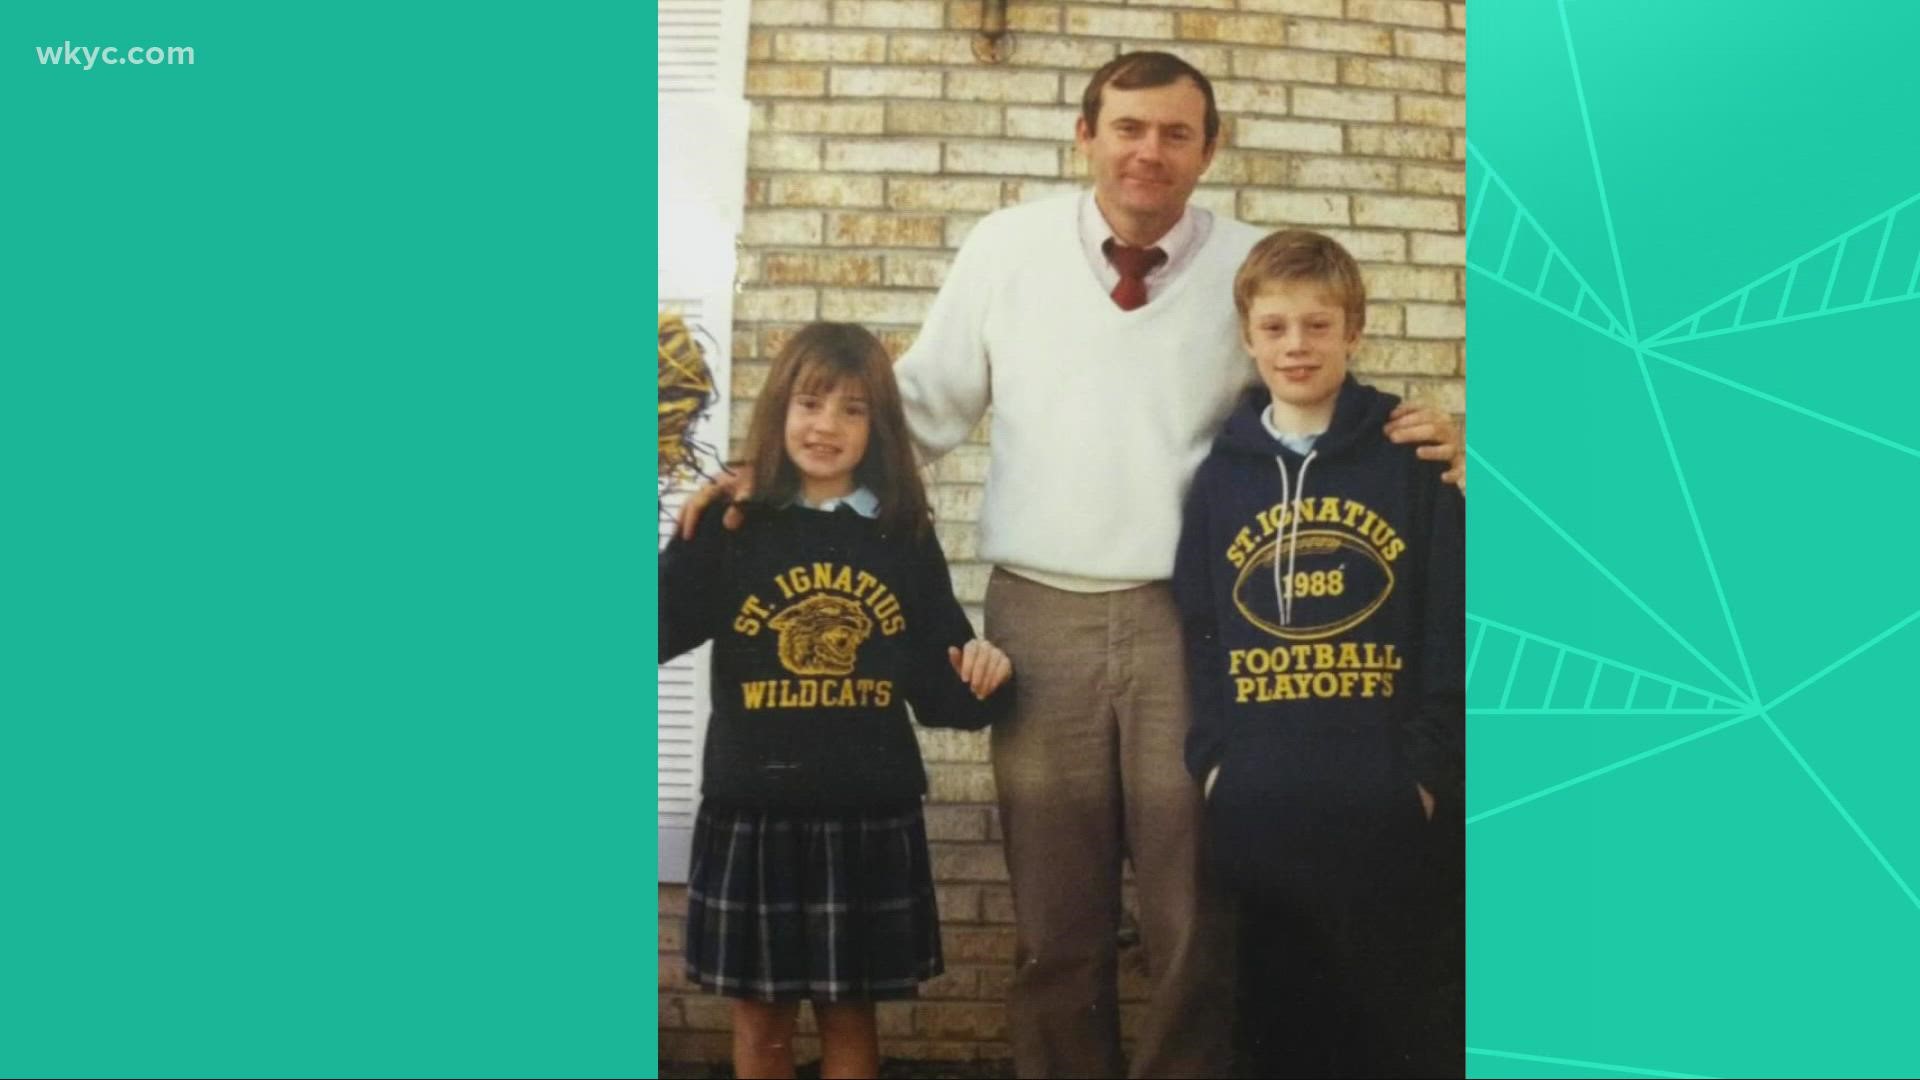 3News' Maureen Kyle shares her reaction to the news that her father is retiring after years of coaching the football team at St. Ignatius in Cleveland.